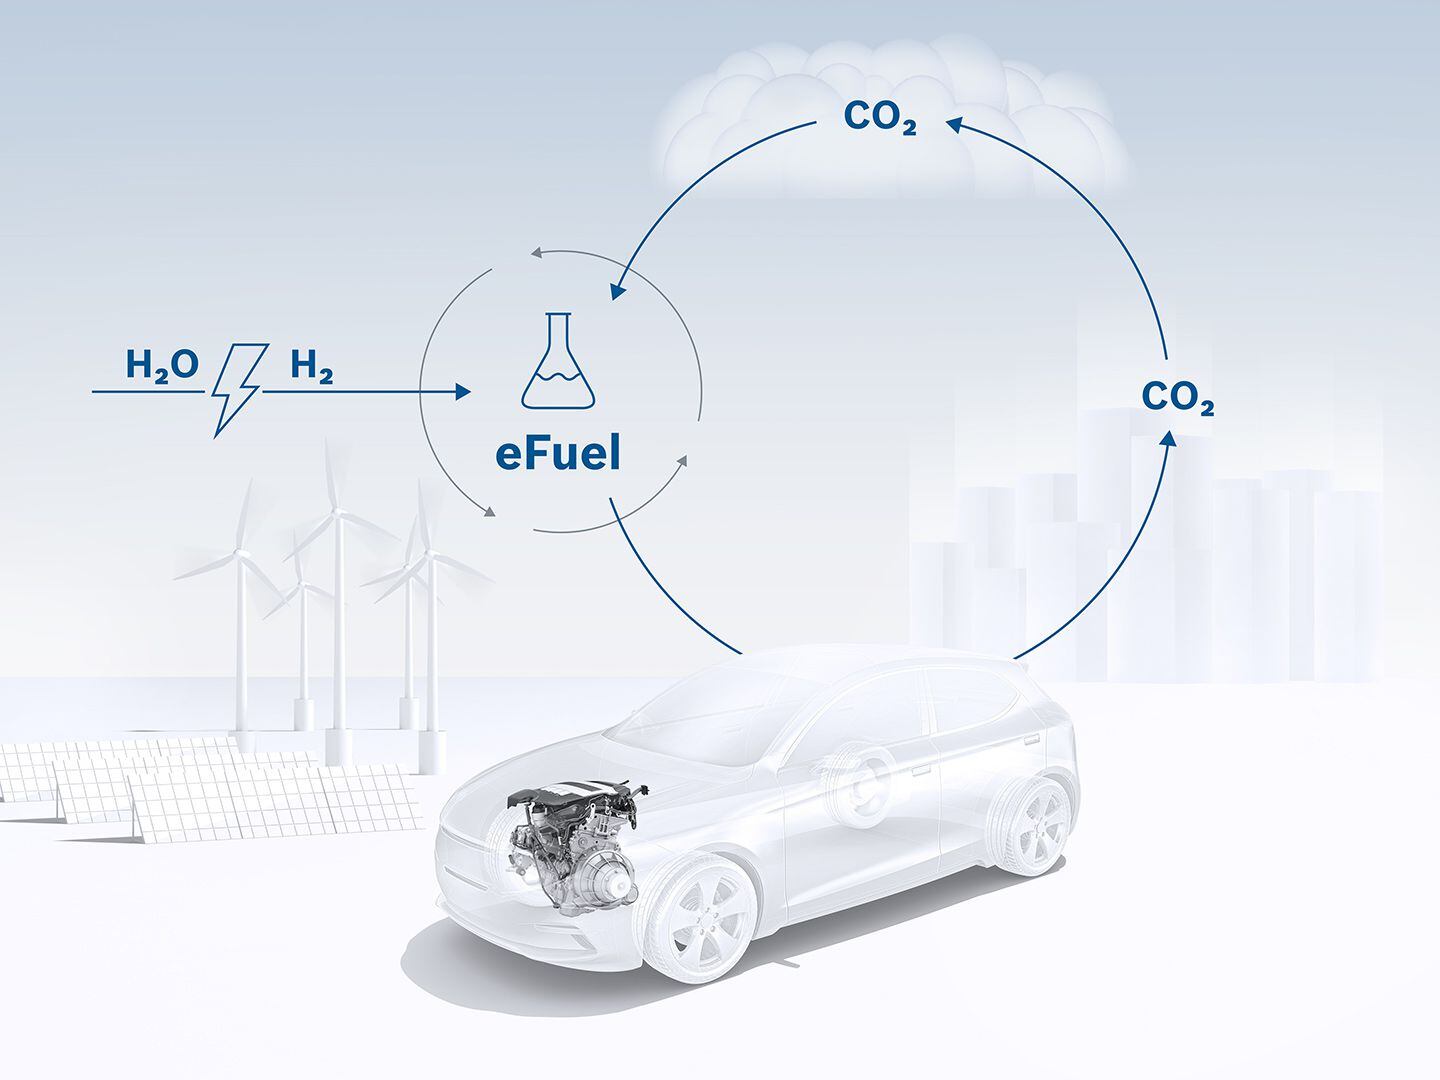 EFuels only put back into the atmosphere what they took out of it in the first place, making them climate neutral.